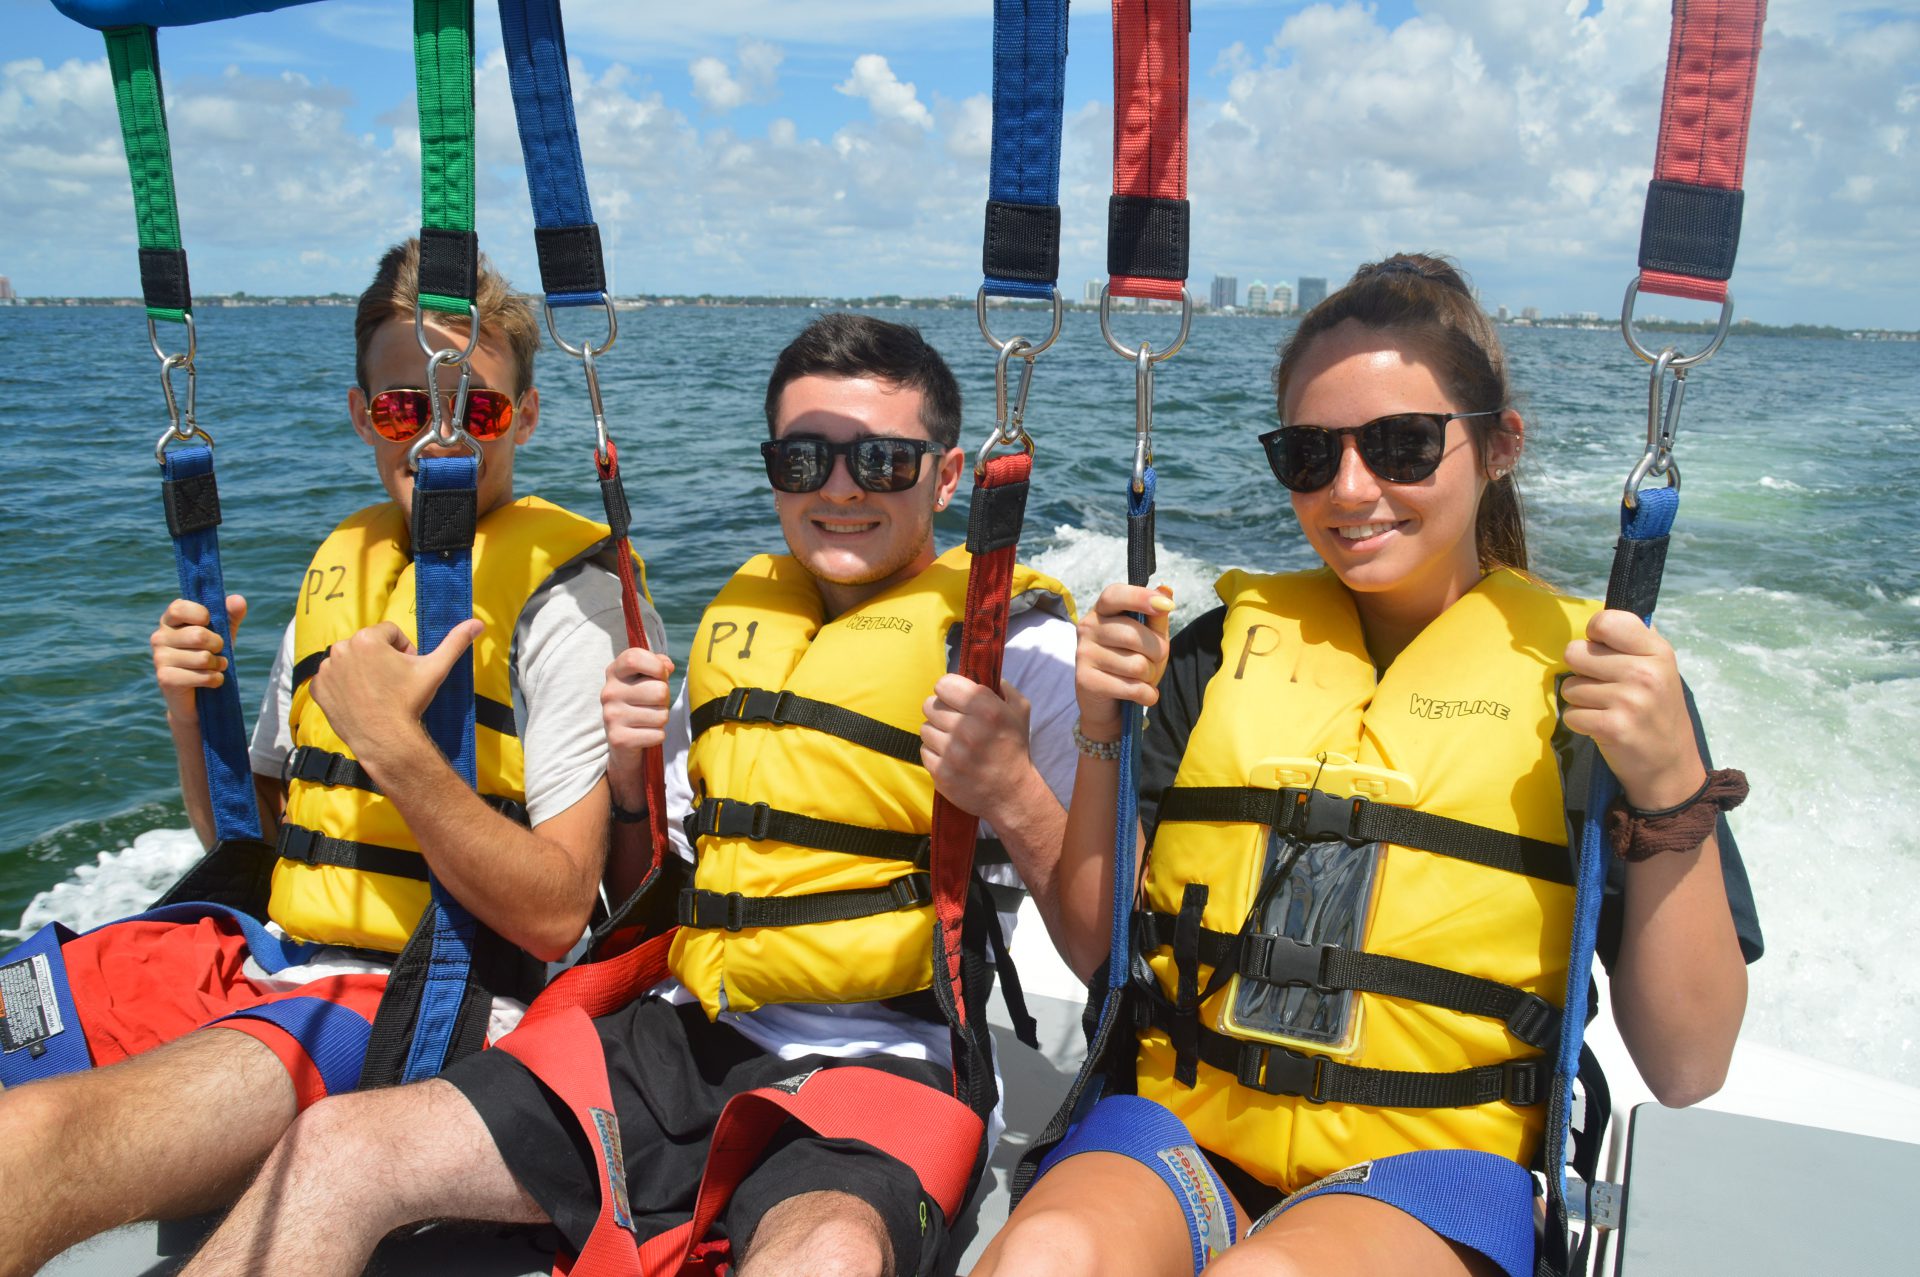 Friends Parasailing a fun thing to do in Miami and Miami beach